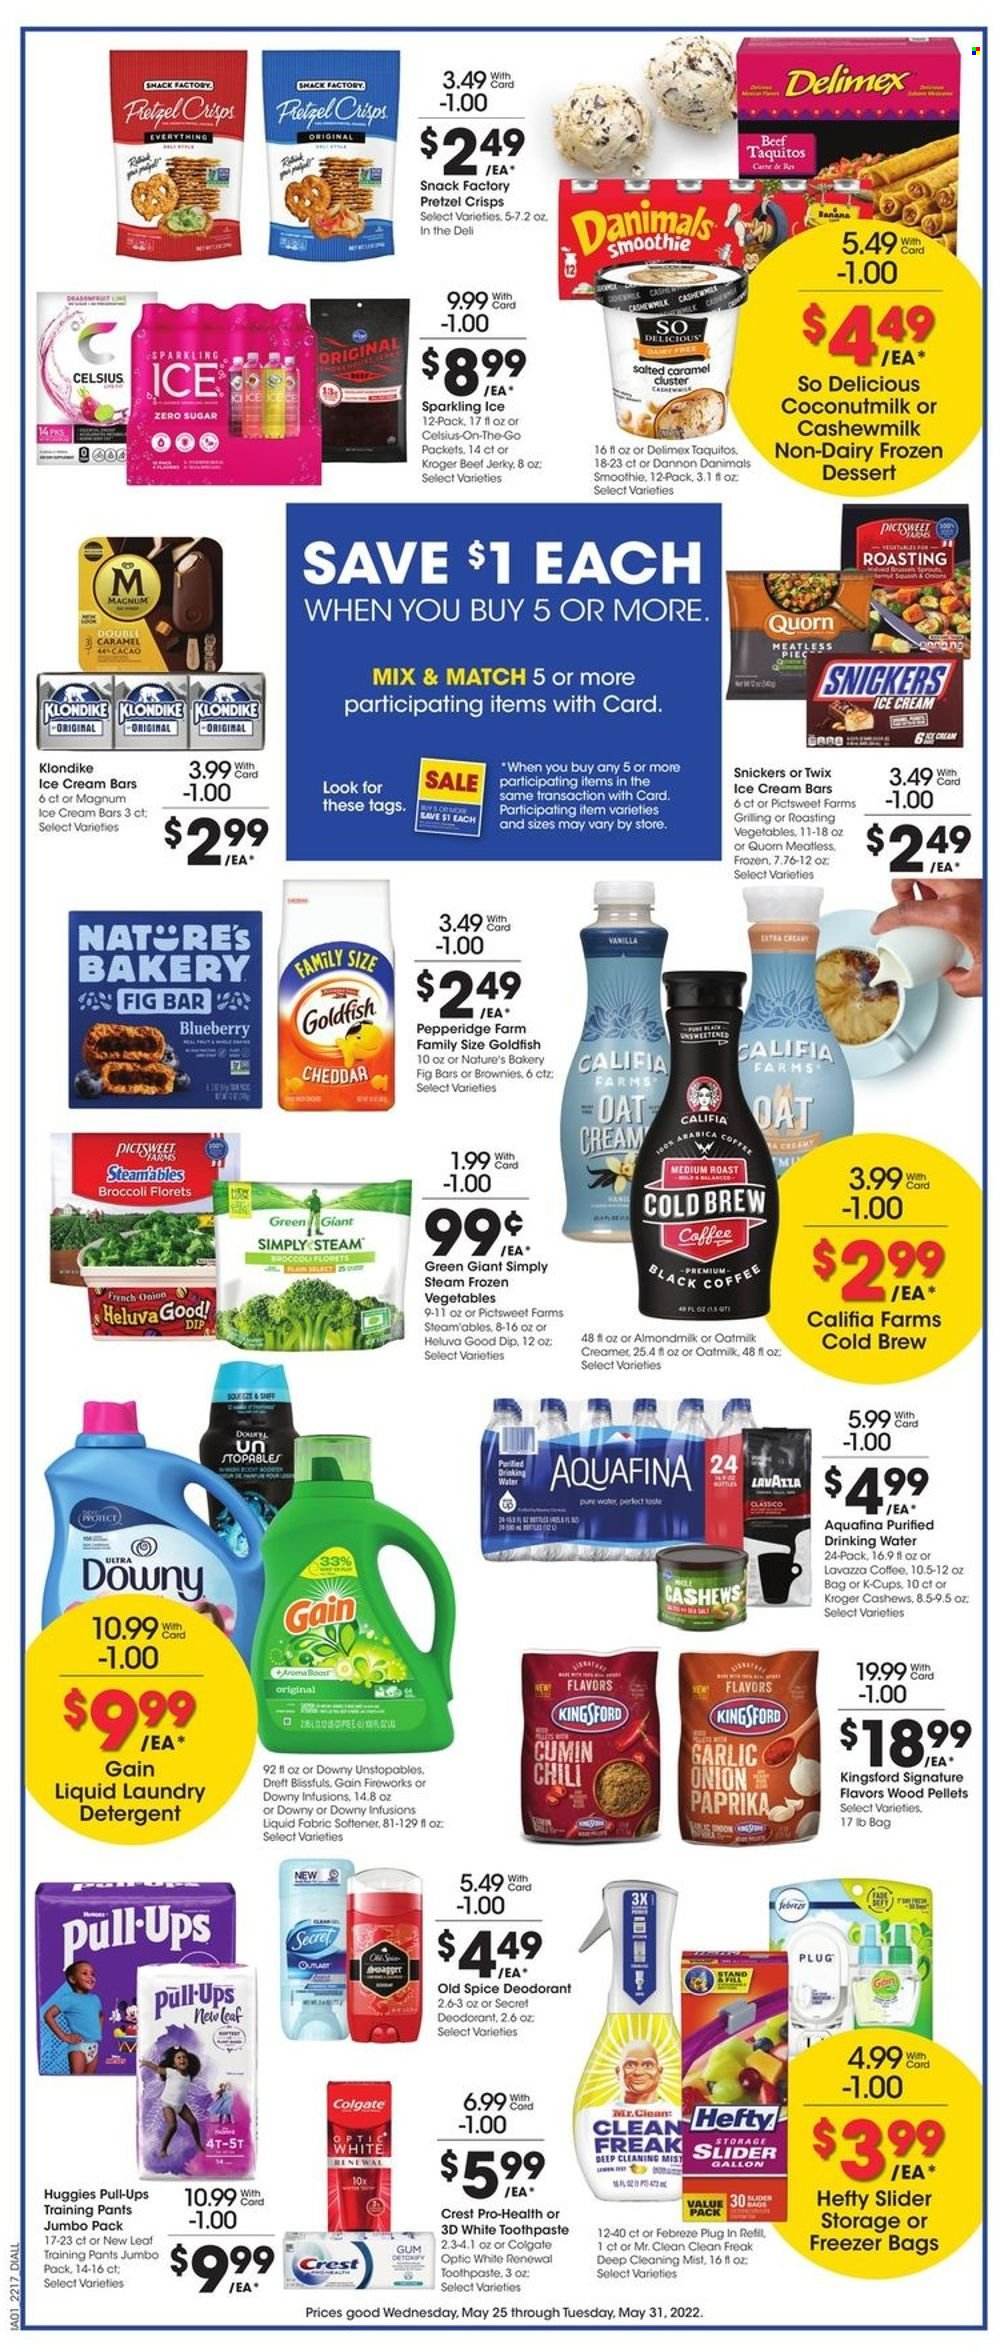 thumbnail - Dillons Flyer - 05/25/2022 - 05/31/2022 - Sales products - broccoli, garlic, onion, taquitos, beef jerky, jerky, cheese, Dannon, Danimals, almond milk, oat milk, creamer, dip, ice cream, ice cream bars, frozen vegetables, snack, Snickers, Twix, Goldfish, pretzel crisps, oats, coconut milk, spice, cumin, Classico, cashews, smoothie, Aquafina, purified water, Boost, coffee, coffee capsules, K-Cups, Lavazza, Huggies, pants, baby pants, detergent, Febreze, Gain, Unstopables, fabric softener, laundry detergent, Rin, Gain Fireworks, Downy Laundry, Old Spice, Colgate, toothpaste, Crest, anti-perspirant, deodorant, Hefty, gallon, freezer bag. Page 4.